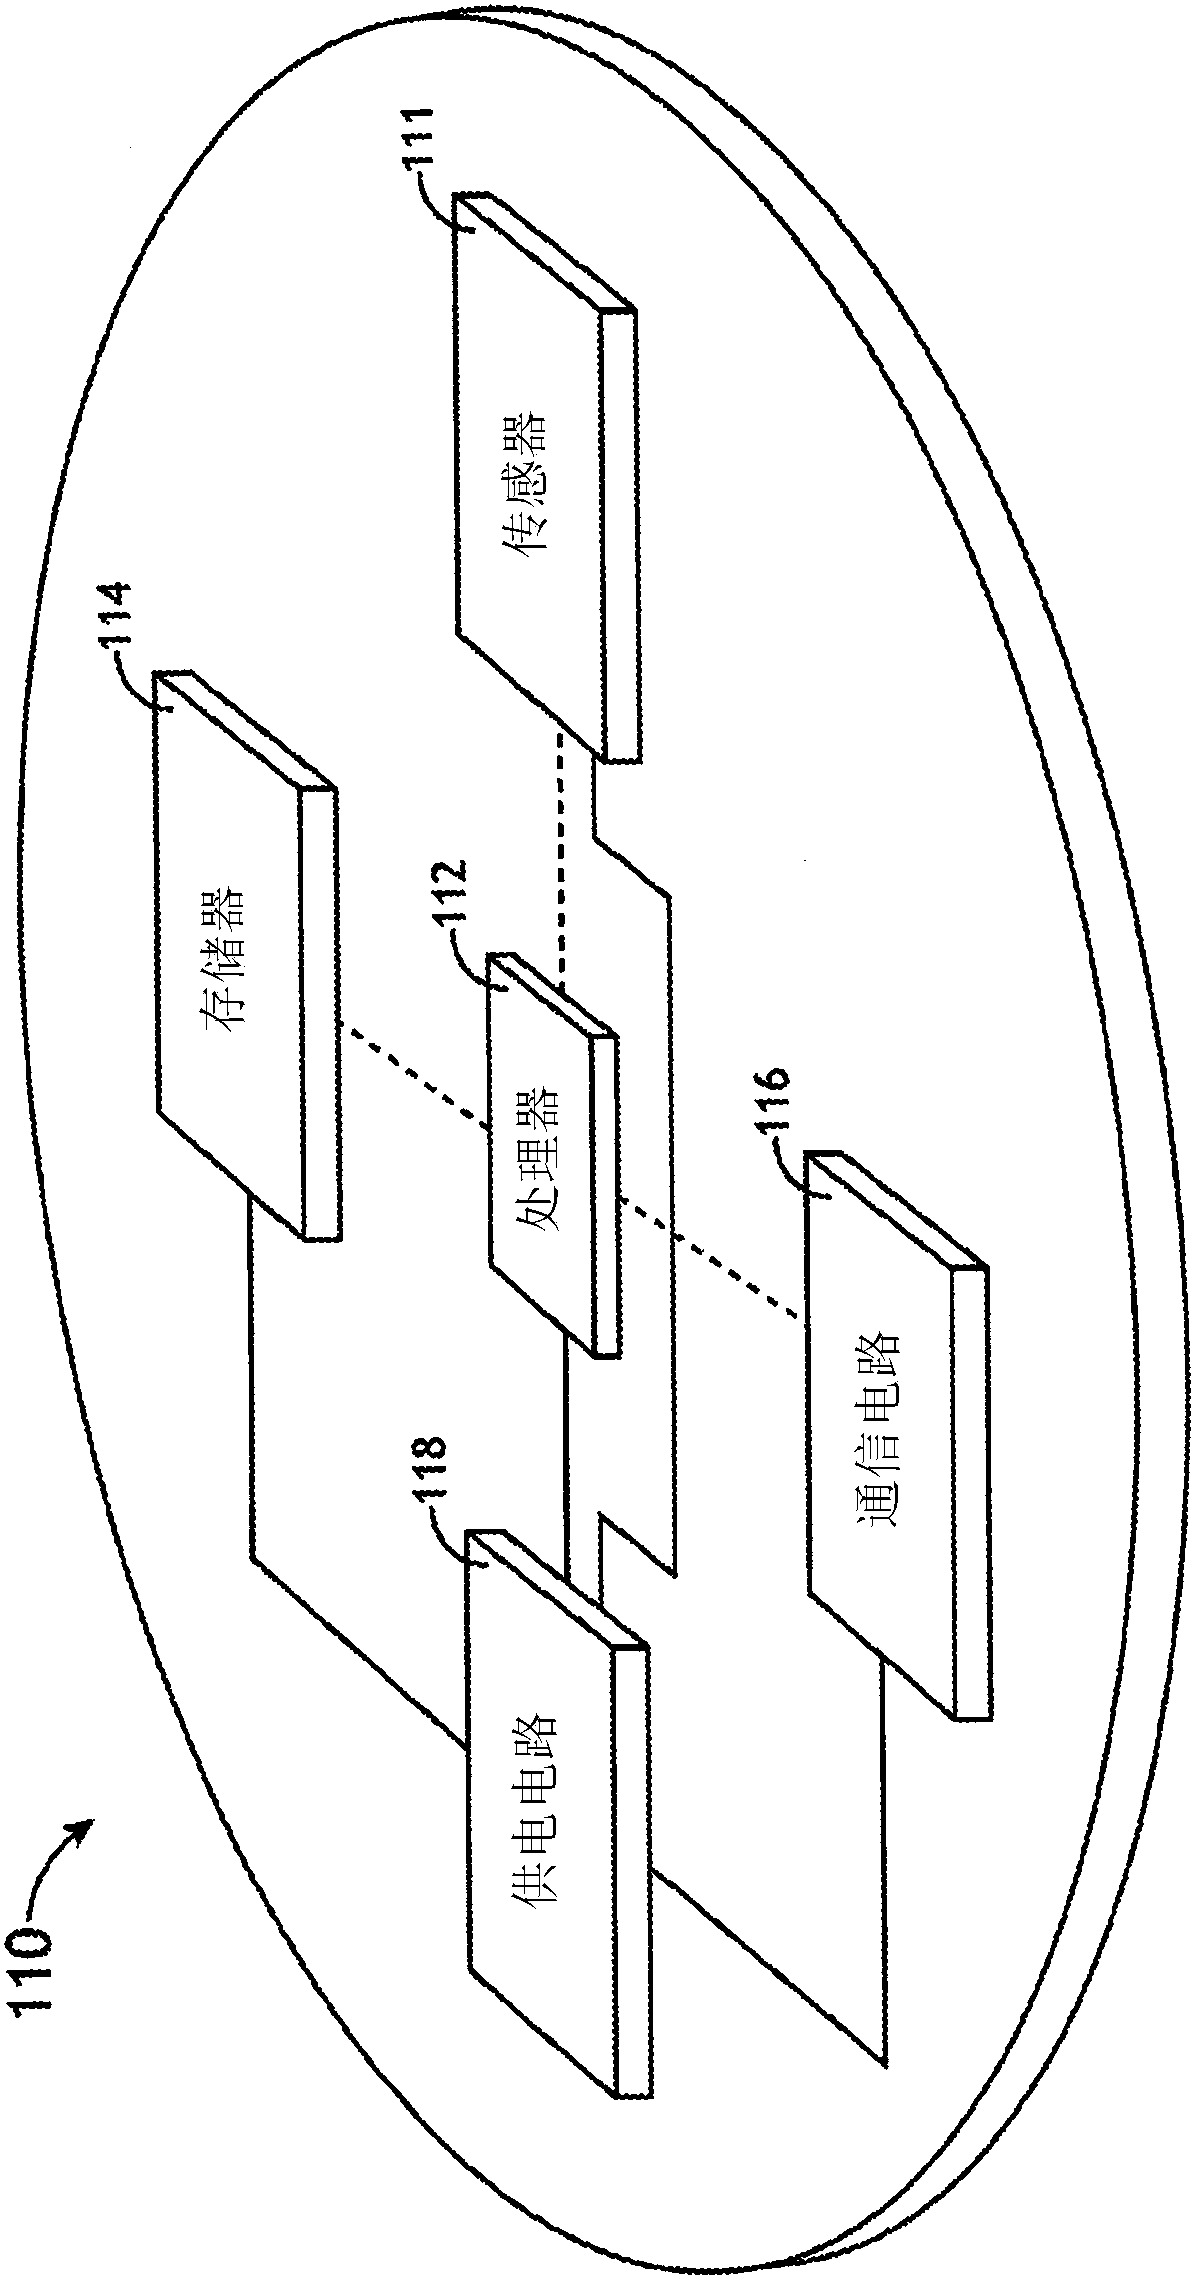 System and method for monitoring parameters of a semiconductor factory automation system